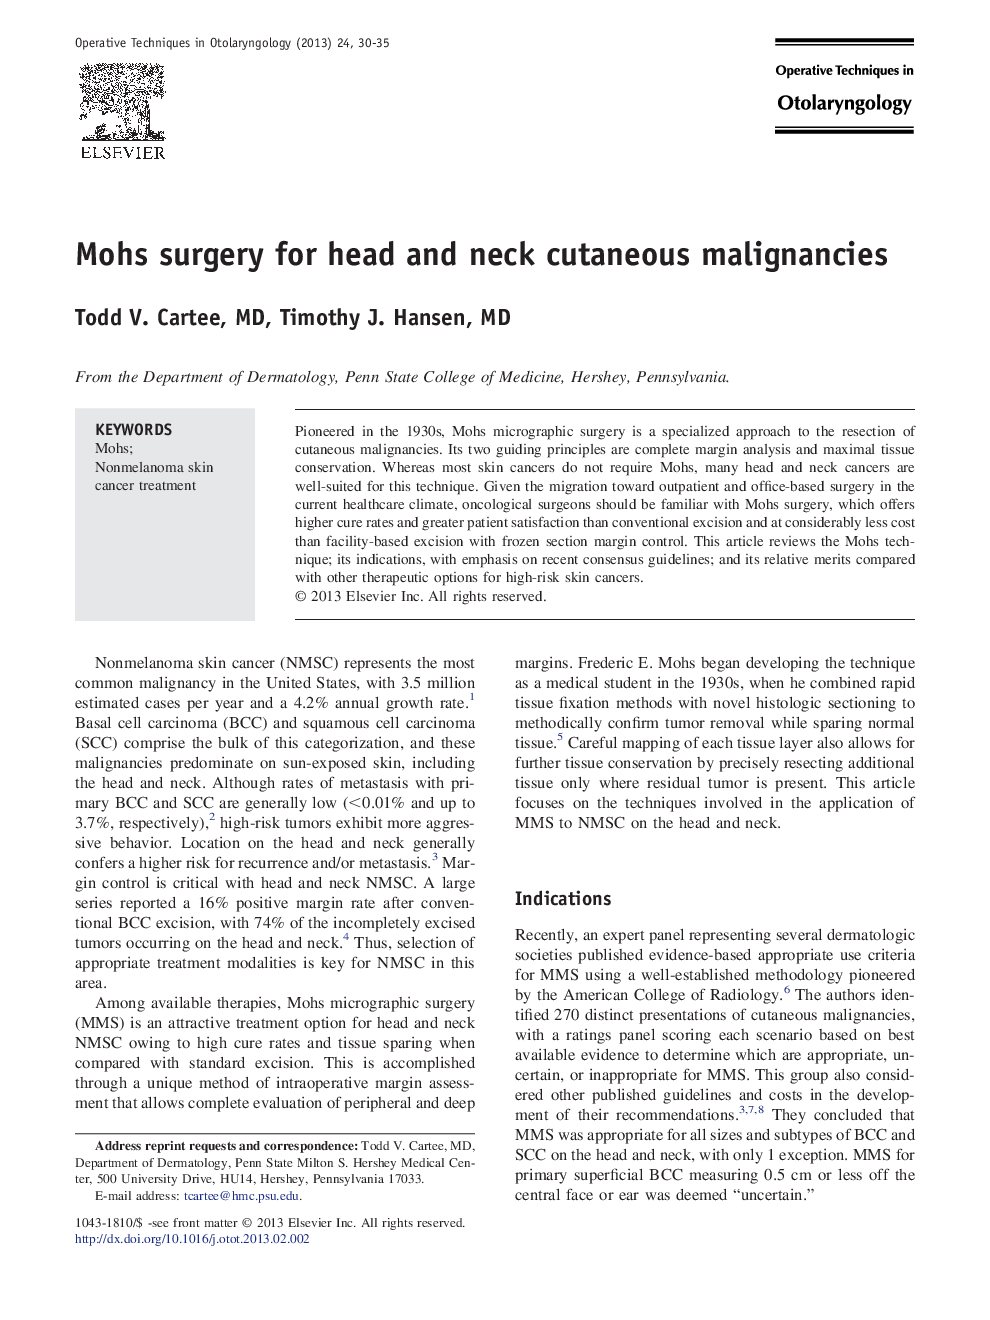 Mohs surgery for head and neck cutaneous malignancies